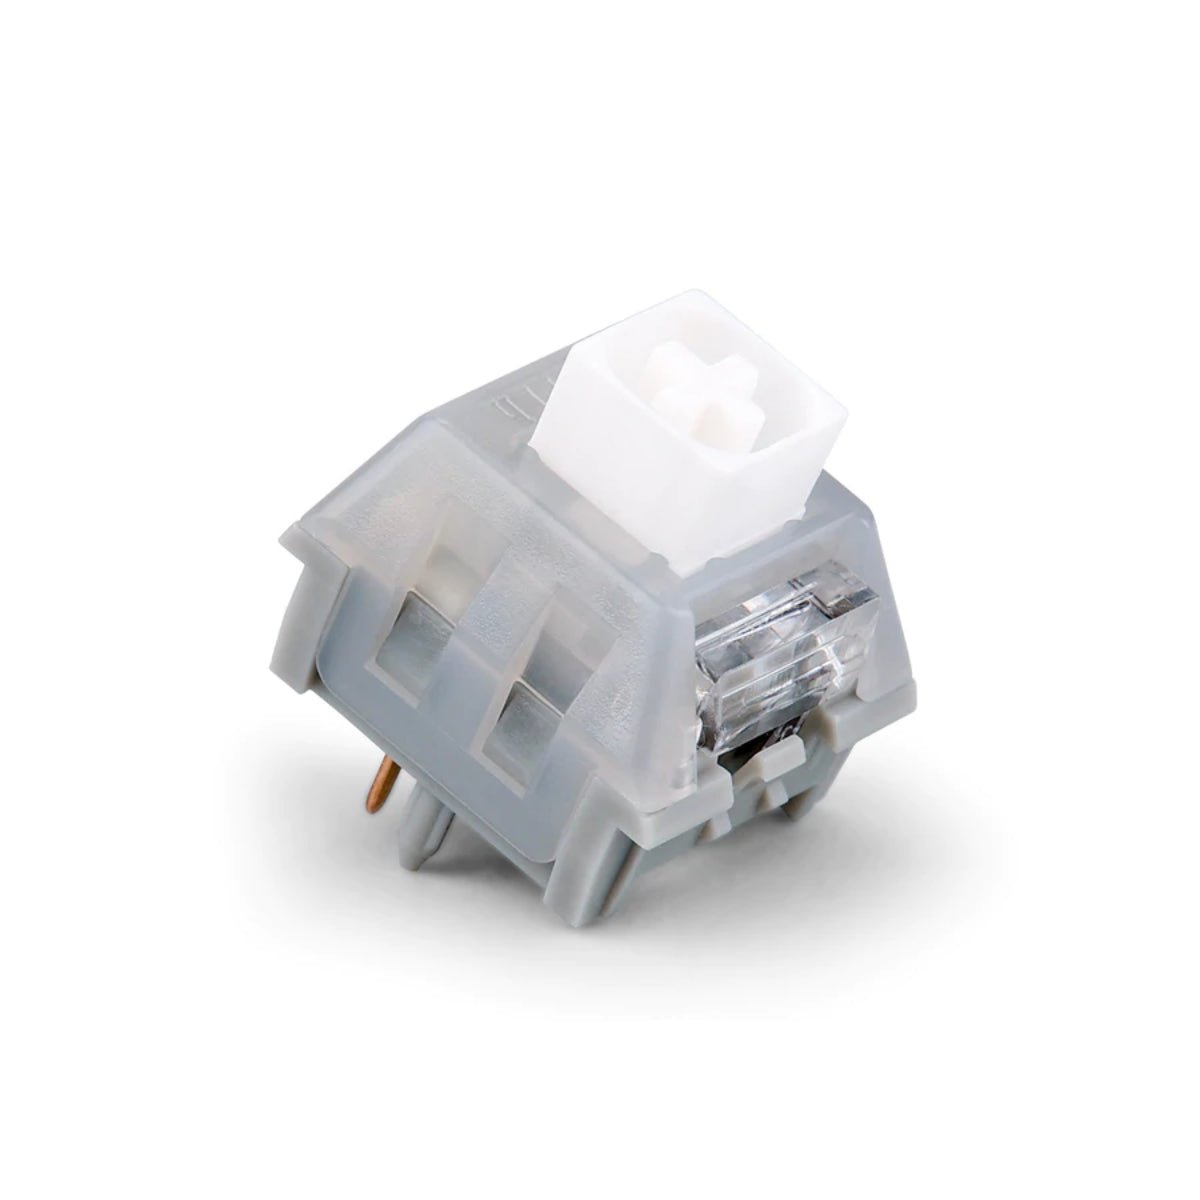 KBD Fans Kailh Box Clicky Switches - White Owl - Store 974 | ستور ٩٧٤